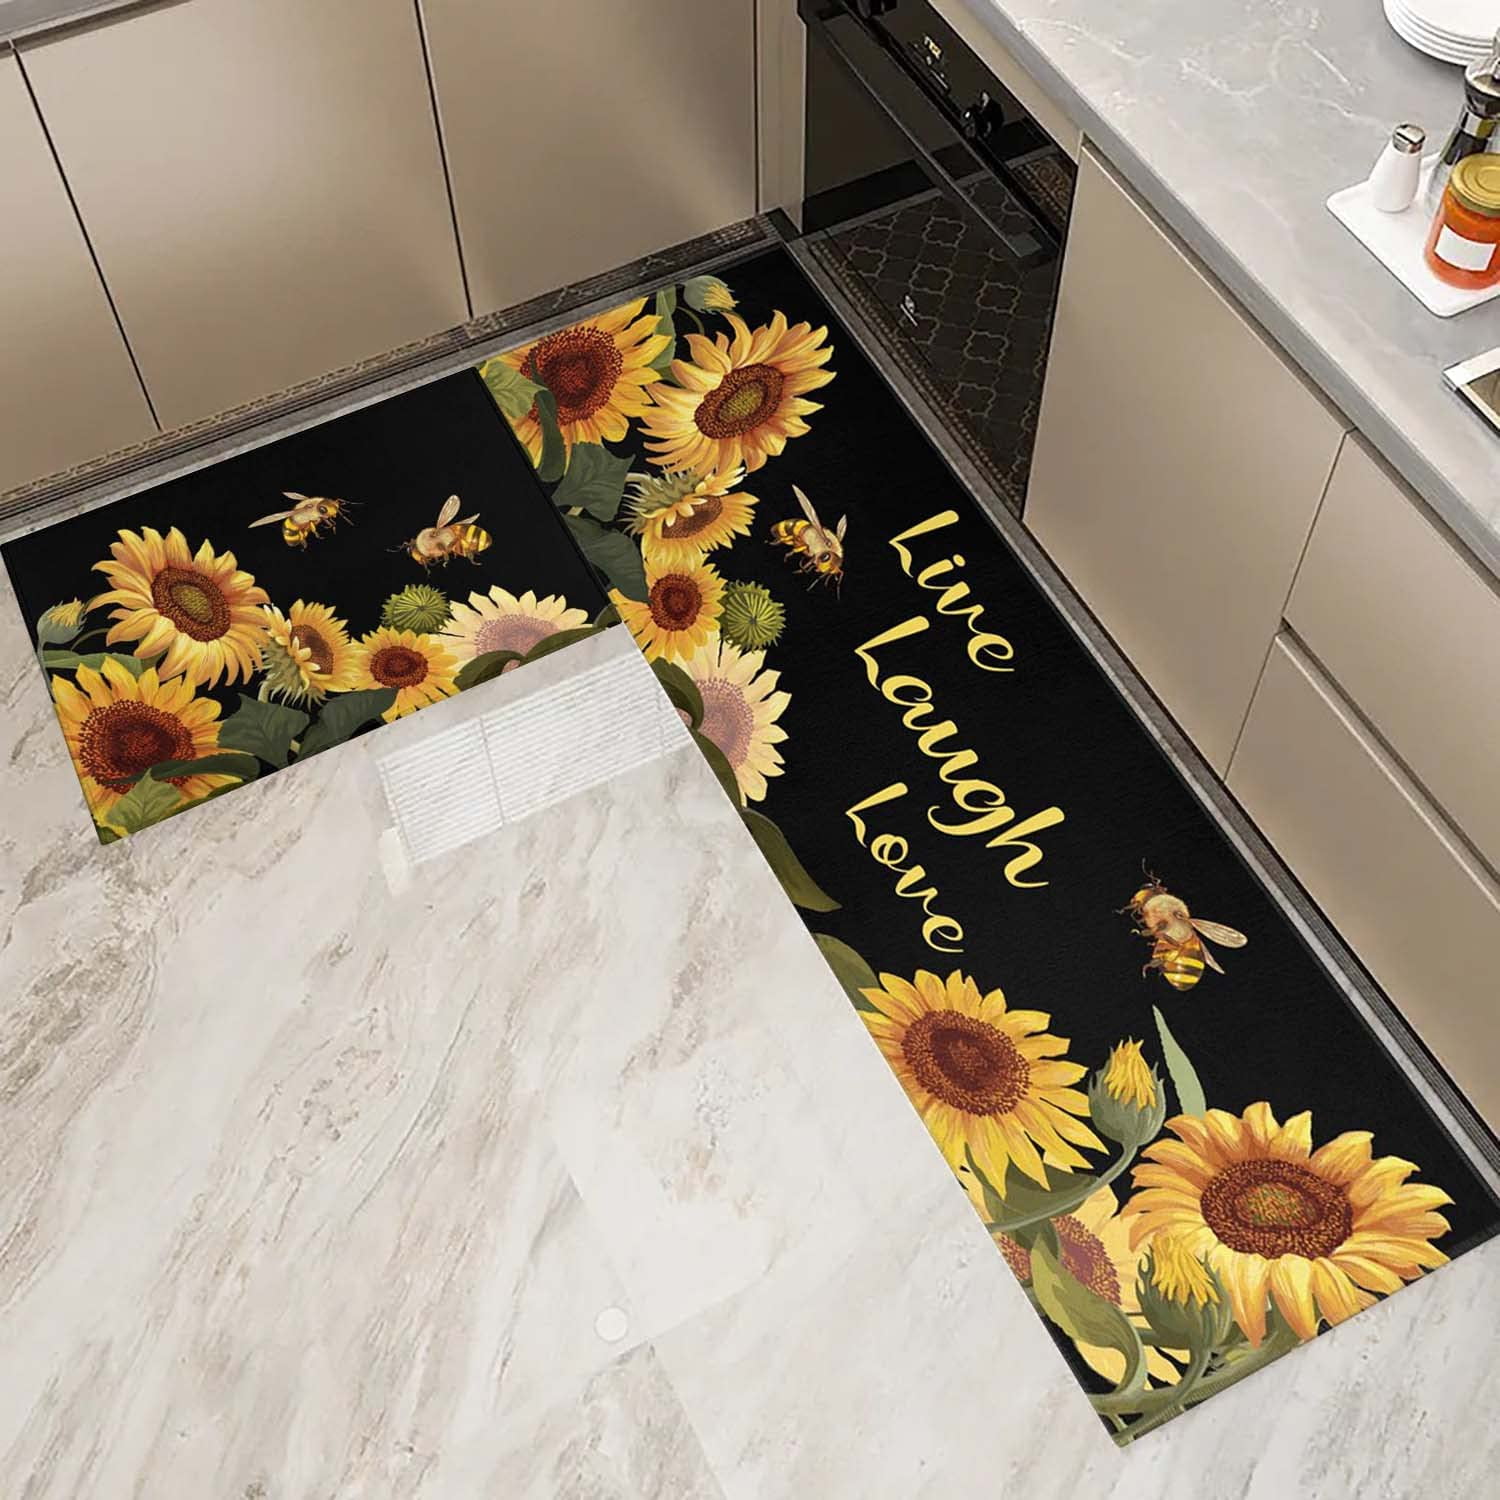 2 Pieces Kitchen Rugs Set Sunflower Bee Countryside,Water Absorbent Soft  Doormat